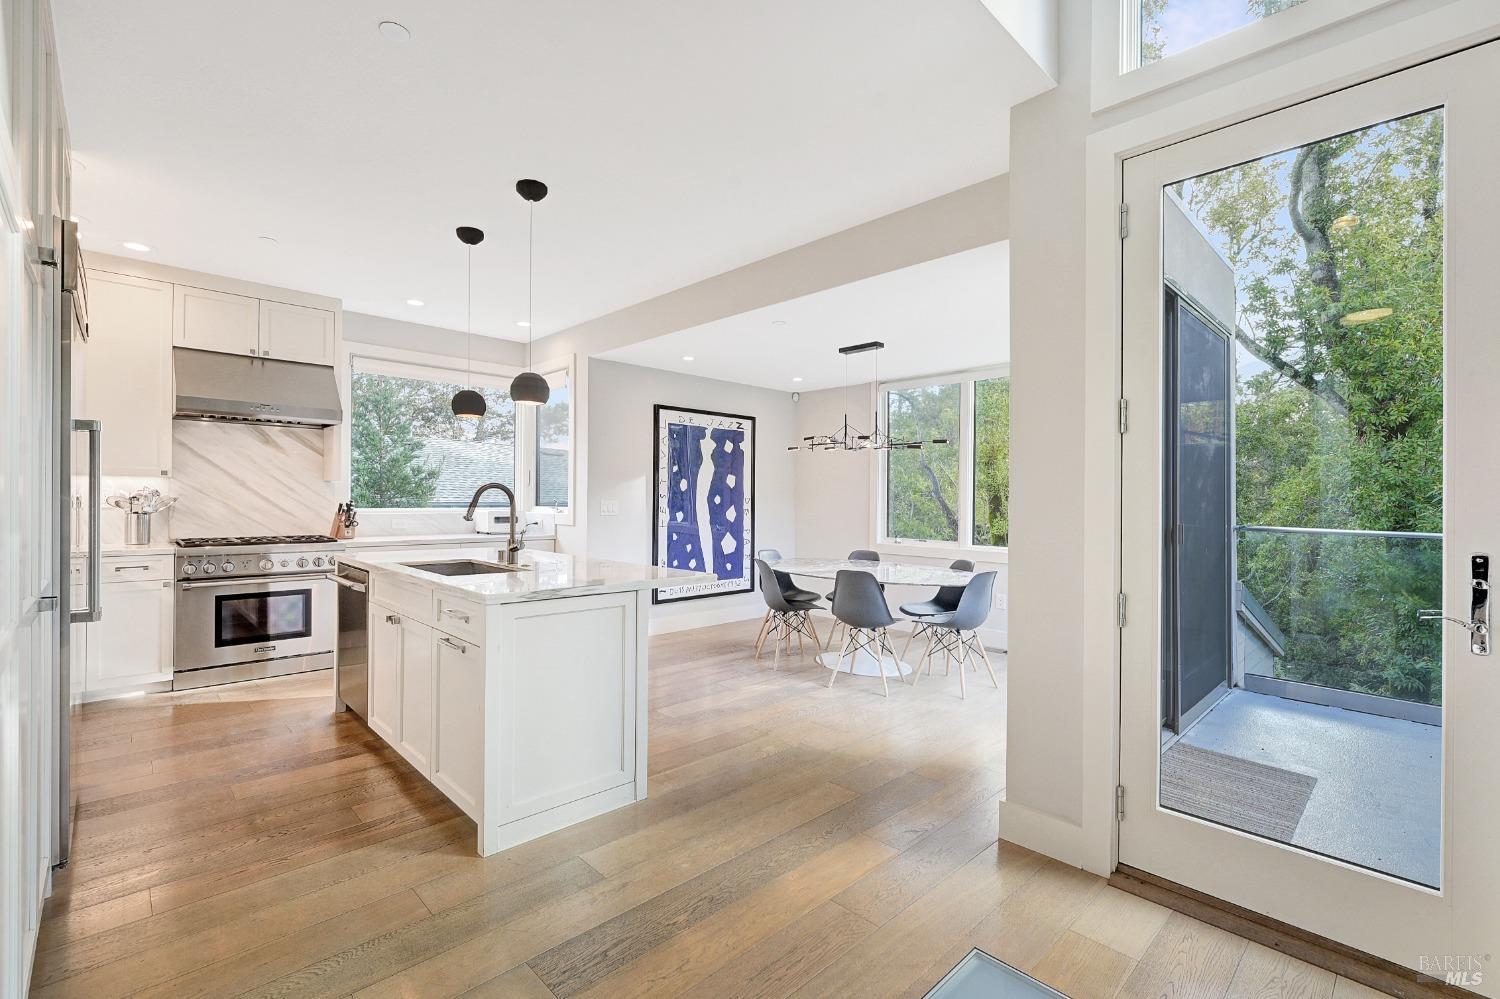 Built in 2013 and designed by architect Jared Polsky, welcome to this modern home in downtown Larkspur. Located above Magnolia Avenue and across the street from Perry's and Equator Coffee, this is one of the most desireable locations in all of Marin County. Looking out at the redwoods, this house feels incredibly private, while being a minute's stroll to everything you would want. Once through the front door, you enter the foyer and are met with a beautiful view of trees through the wall of windows. On this level is the designer kitchen with carrara marble counters and thermador appliances, dining room with doors leading out to the private deck, half bath and living room, perfect for entertaining. Down the stairs on the second level are two guest rooms, a full bathroom and the primary suite, with an incredible walk-in closet and large bathroom with a dual vanity, soaking tub and beautful shower. On the bottom level, there is the fourth bedroom, spacious laundry room, an enormous storage room and a bonus/family room with access to the rear deck and yard, plus your own private staircase leading to Magnolia Ave and all of the restaurants and boutiques that charming Larkspur has to offer.